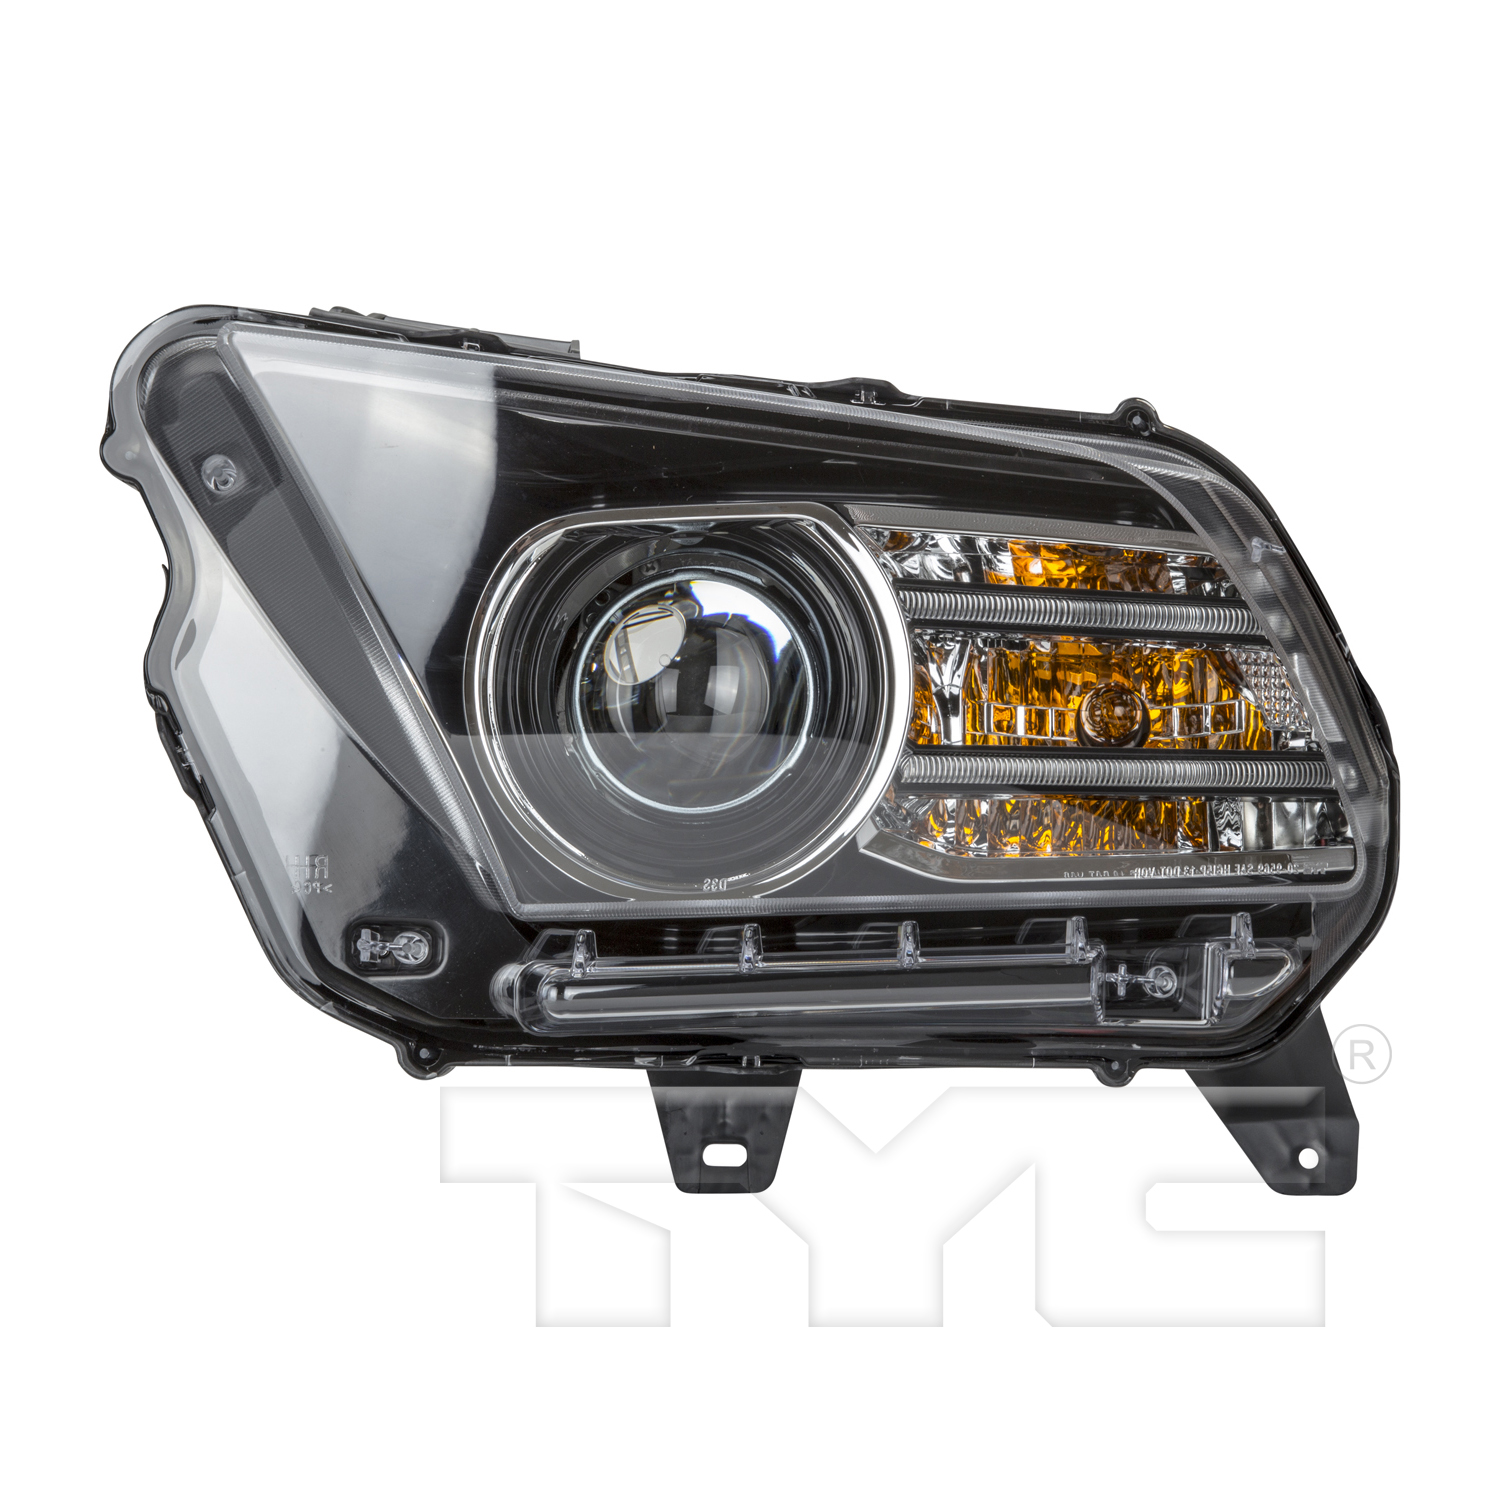 Aftermarket HEADLIGHTS for FORD - MUSTANG, MUSTANG,13-14,LT Headlamp lens/housing